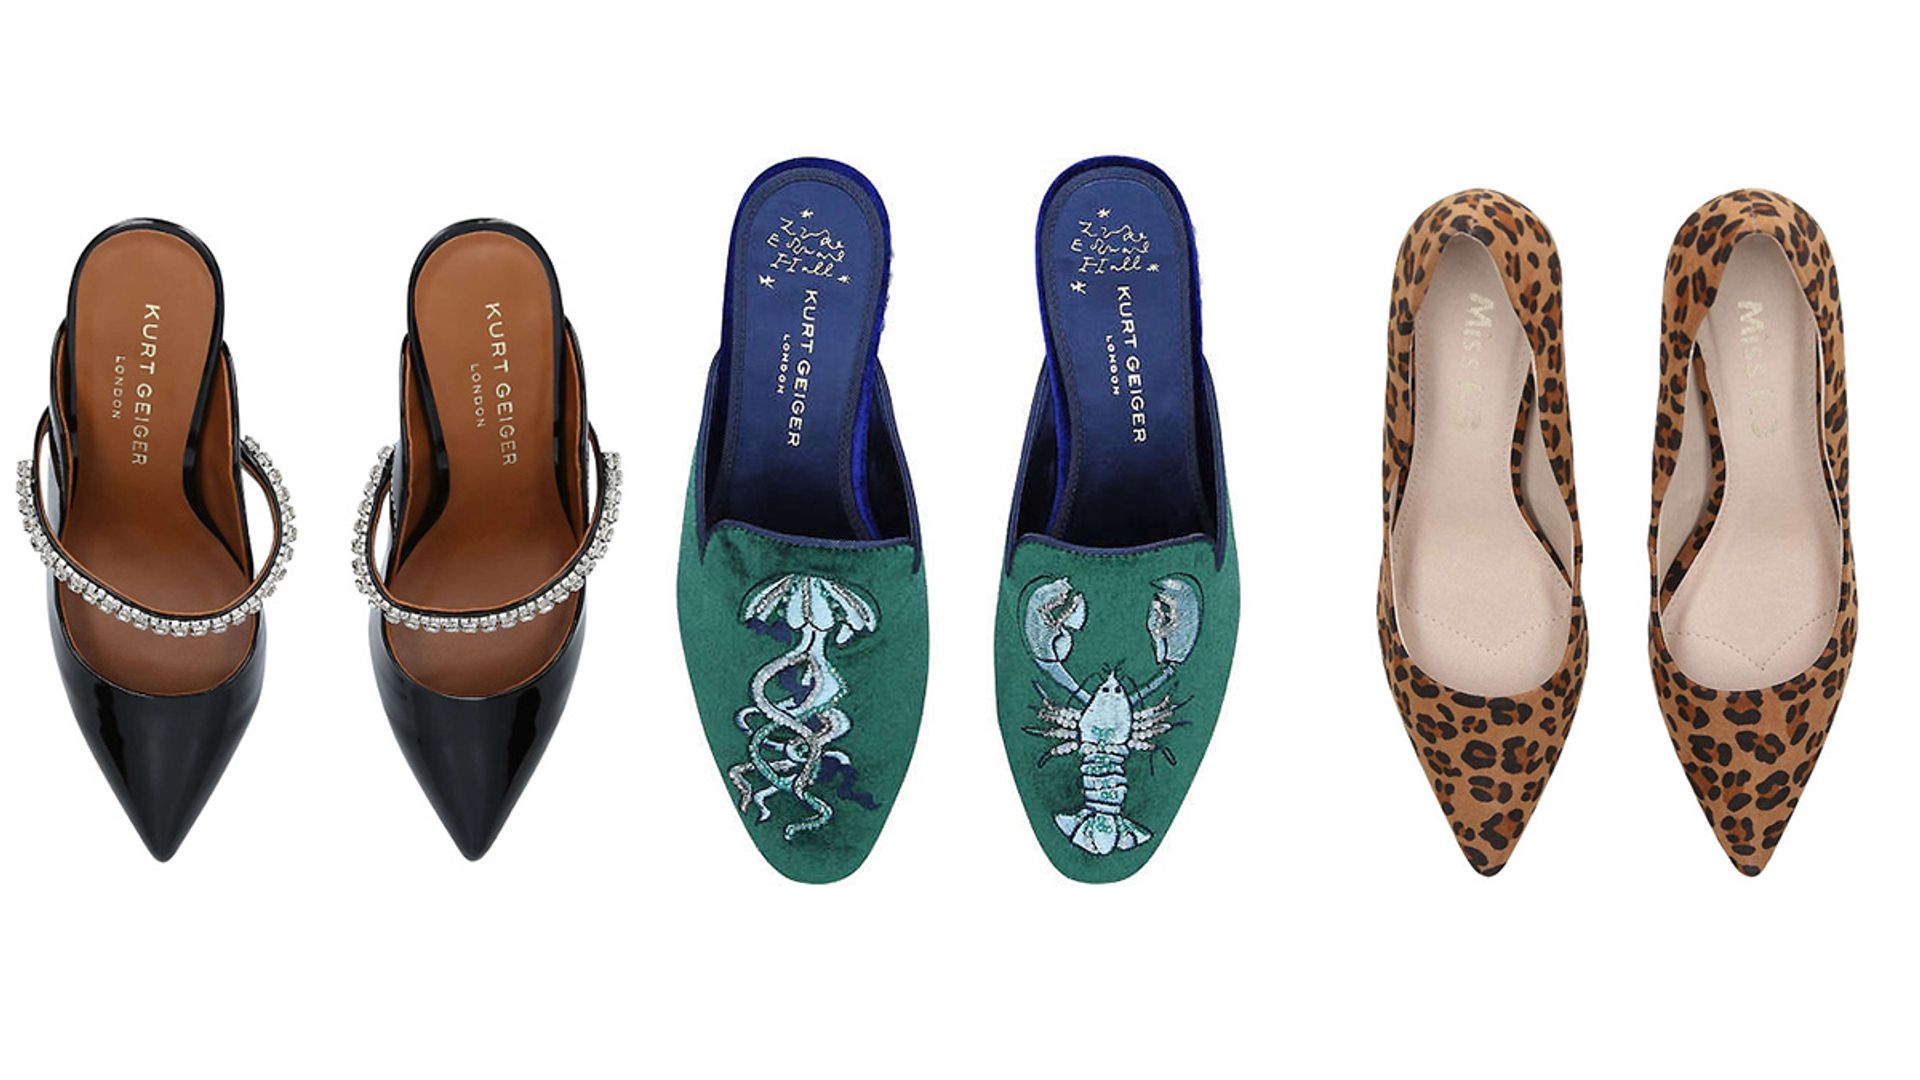 Kurt Geiger has twenty percent off right now! Here's our top picks...